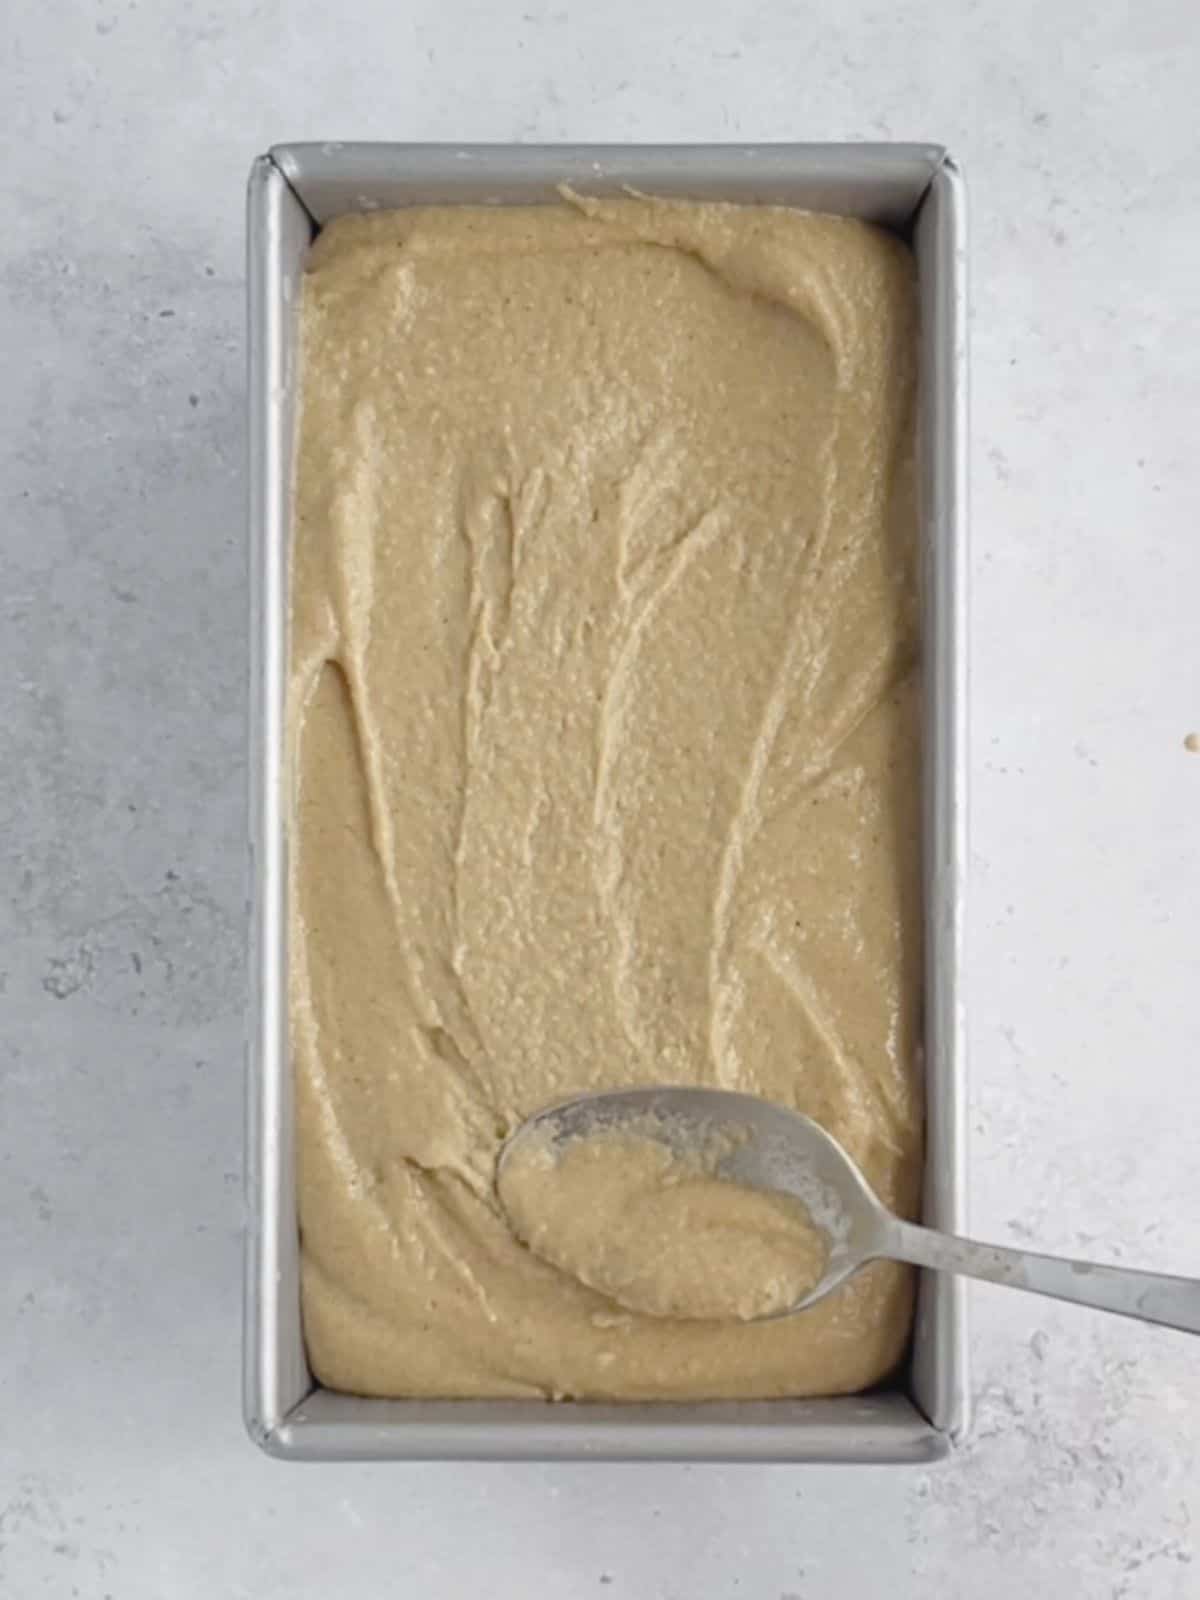 churned coffee ice cream added to a rectangular loaf tin to freeze.